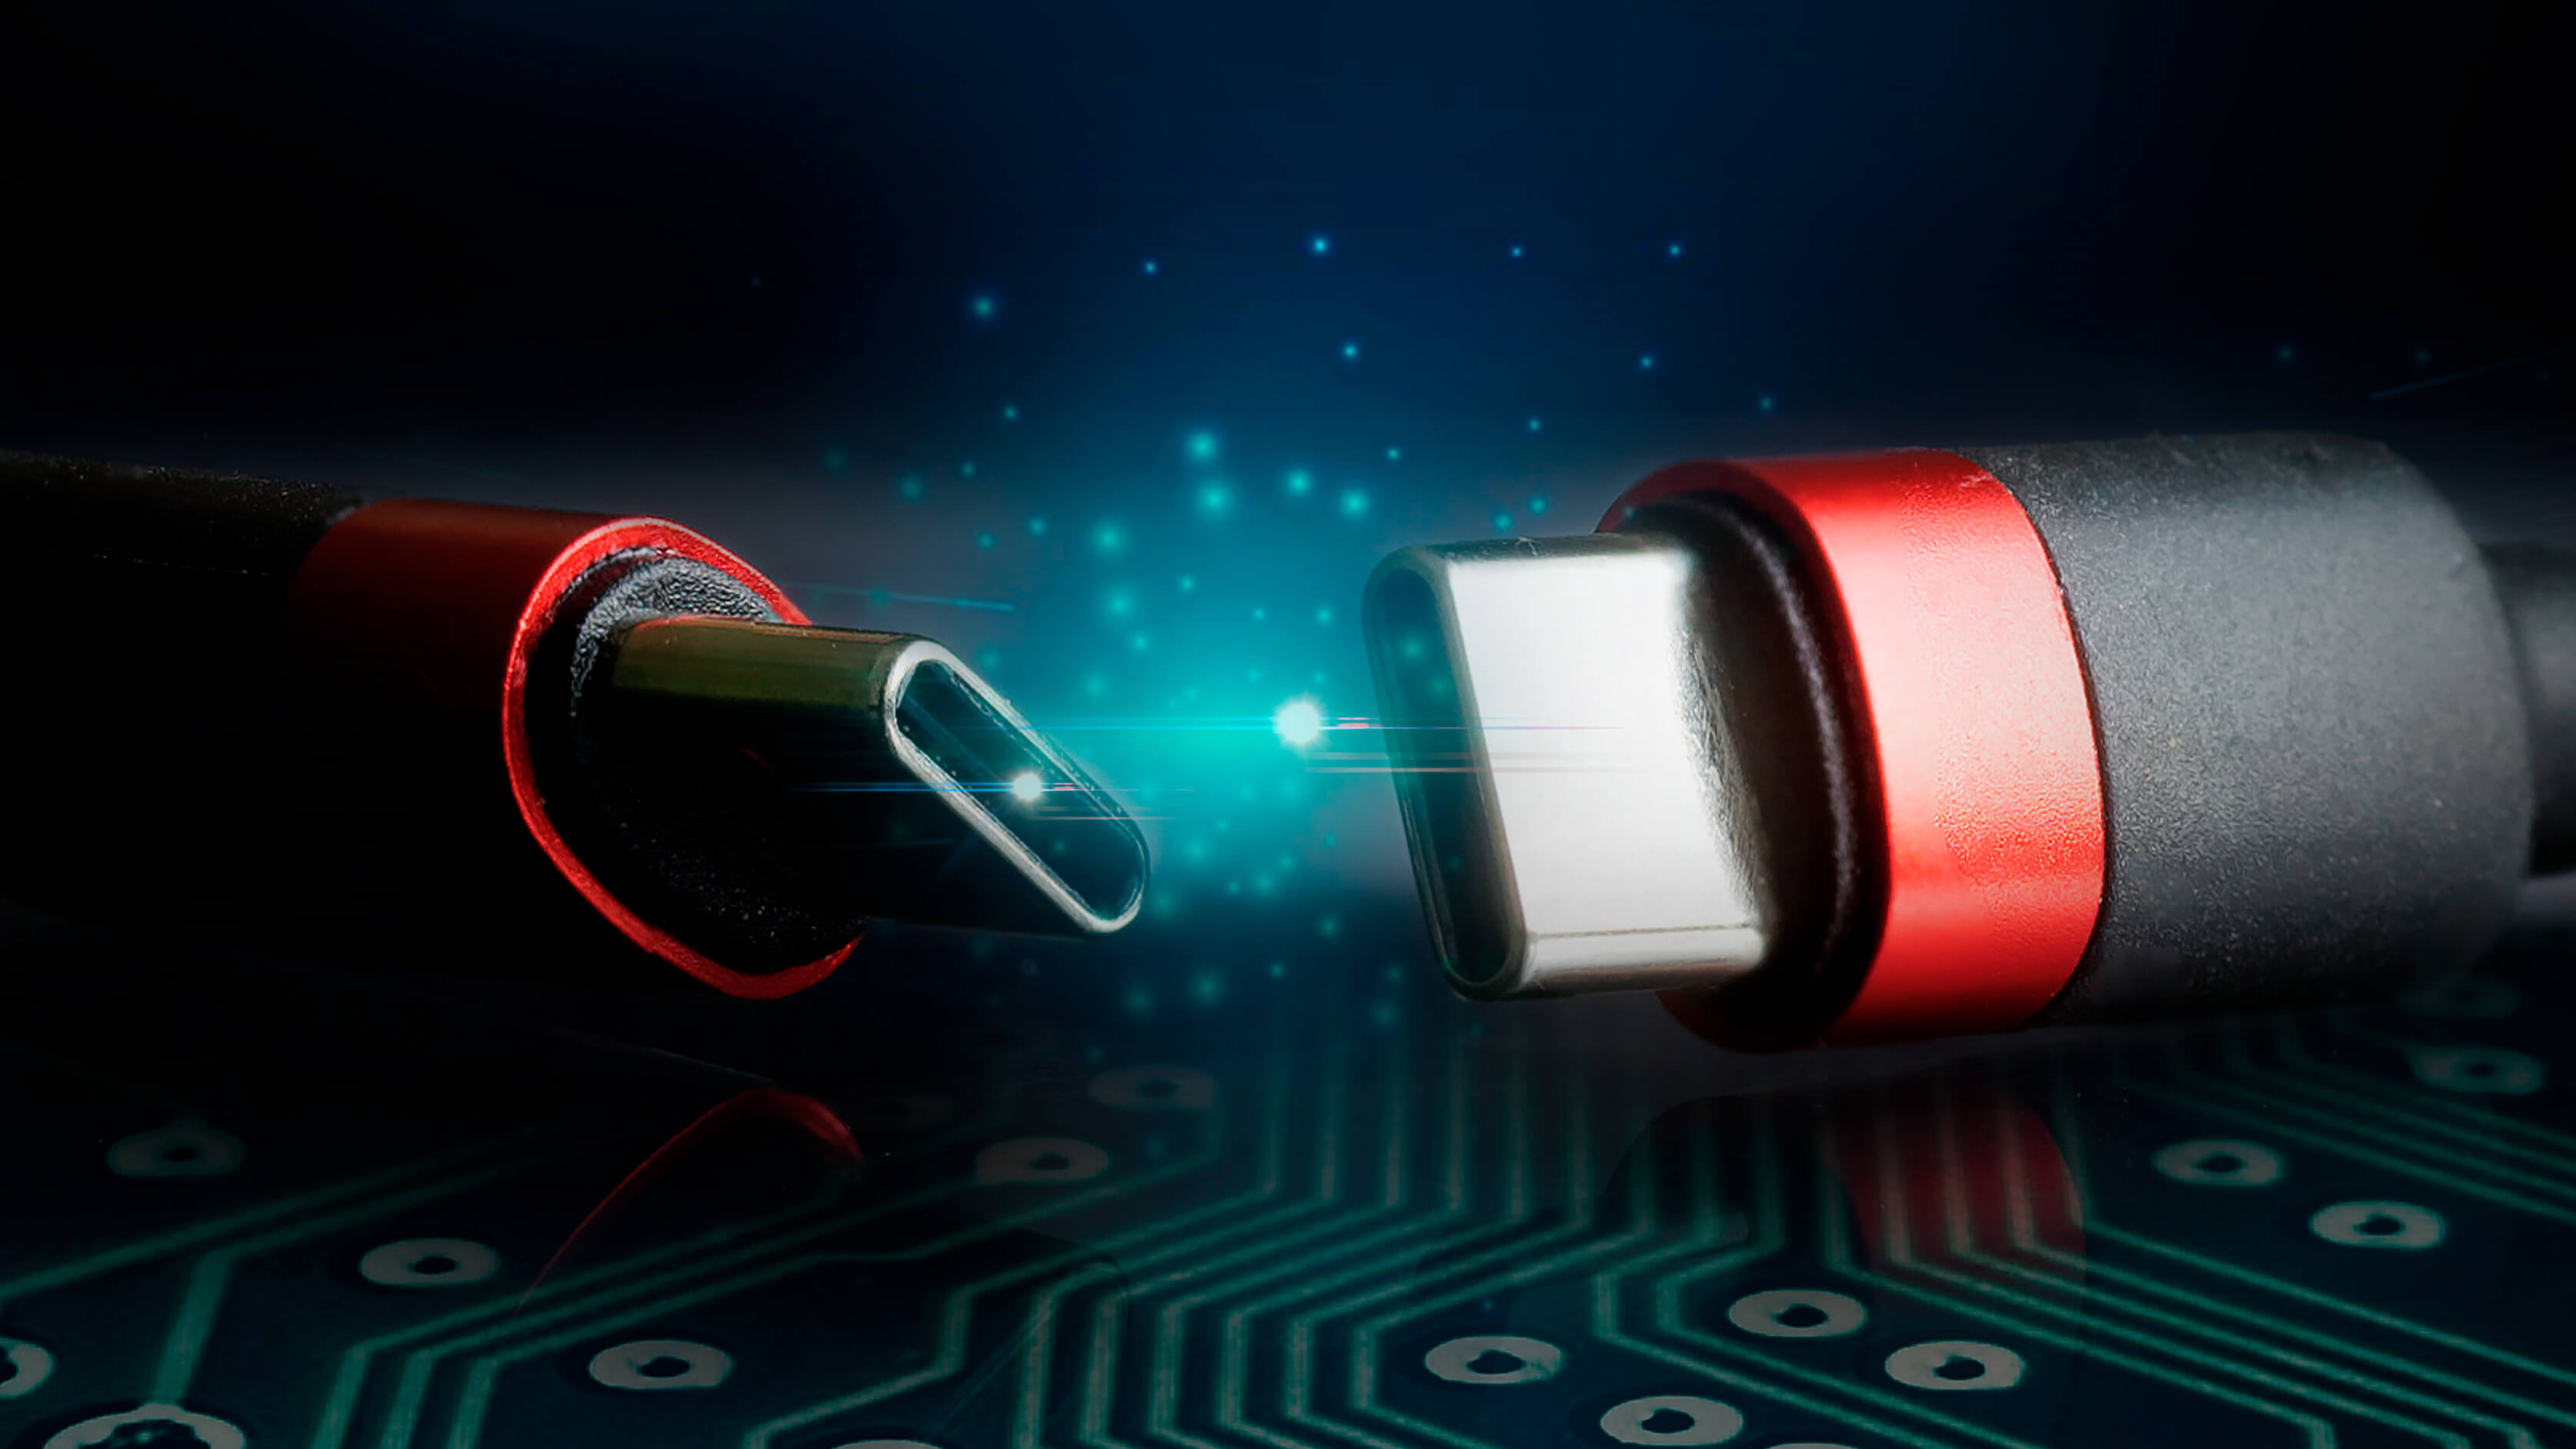 USB Type-C connector is taking over the world and Richtek can help